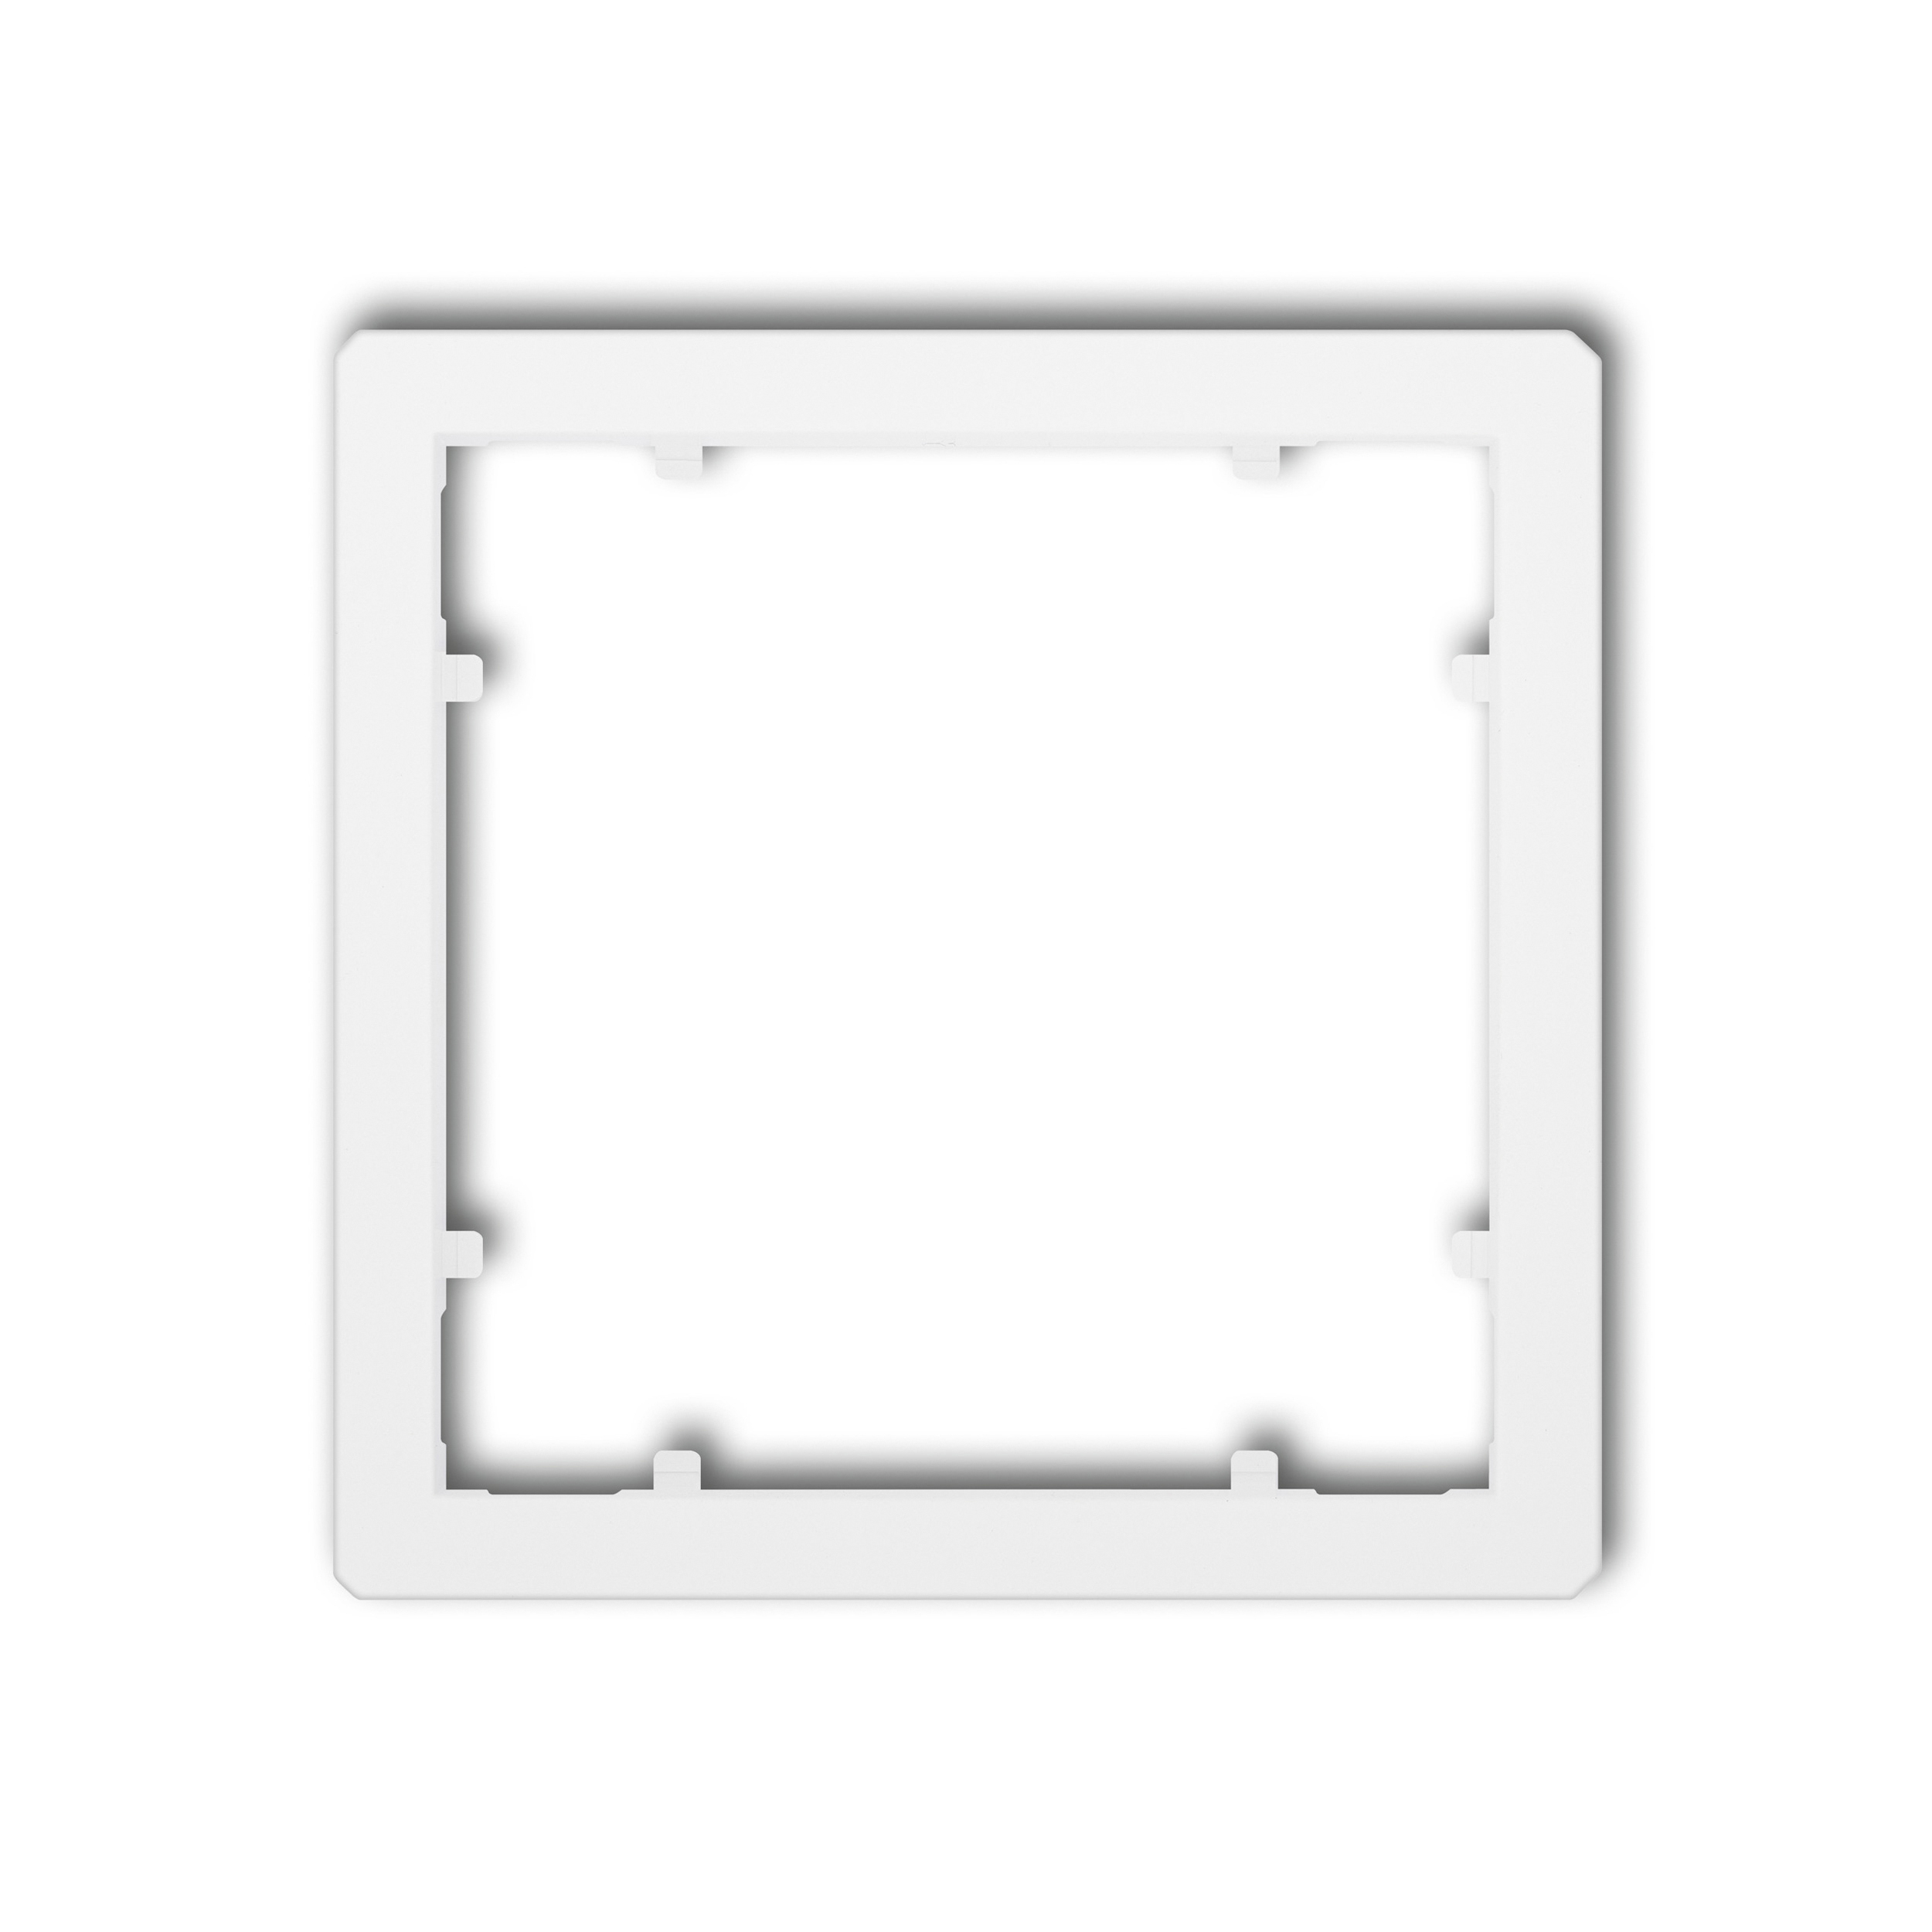 Adapter for 55x55 mm standard